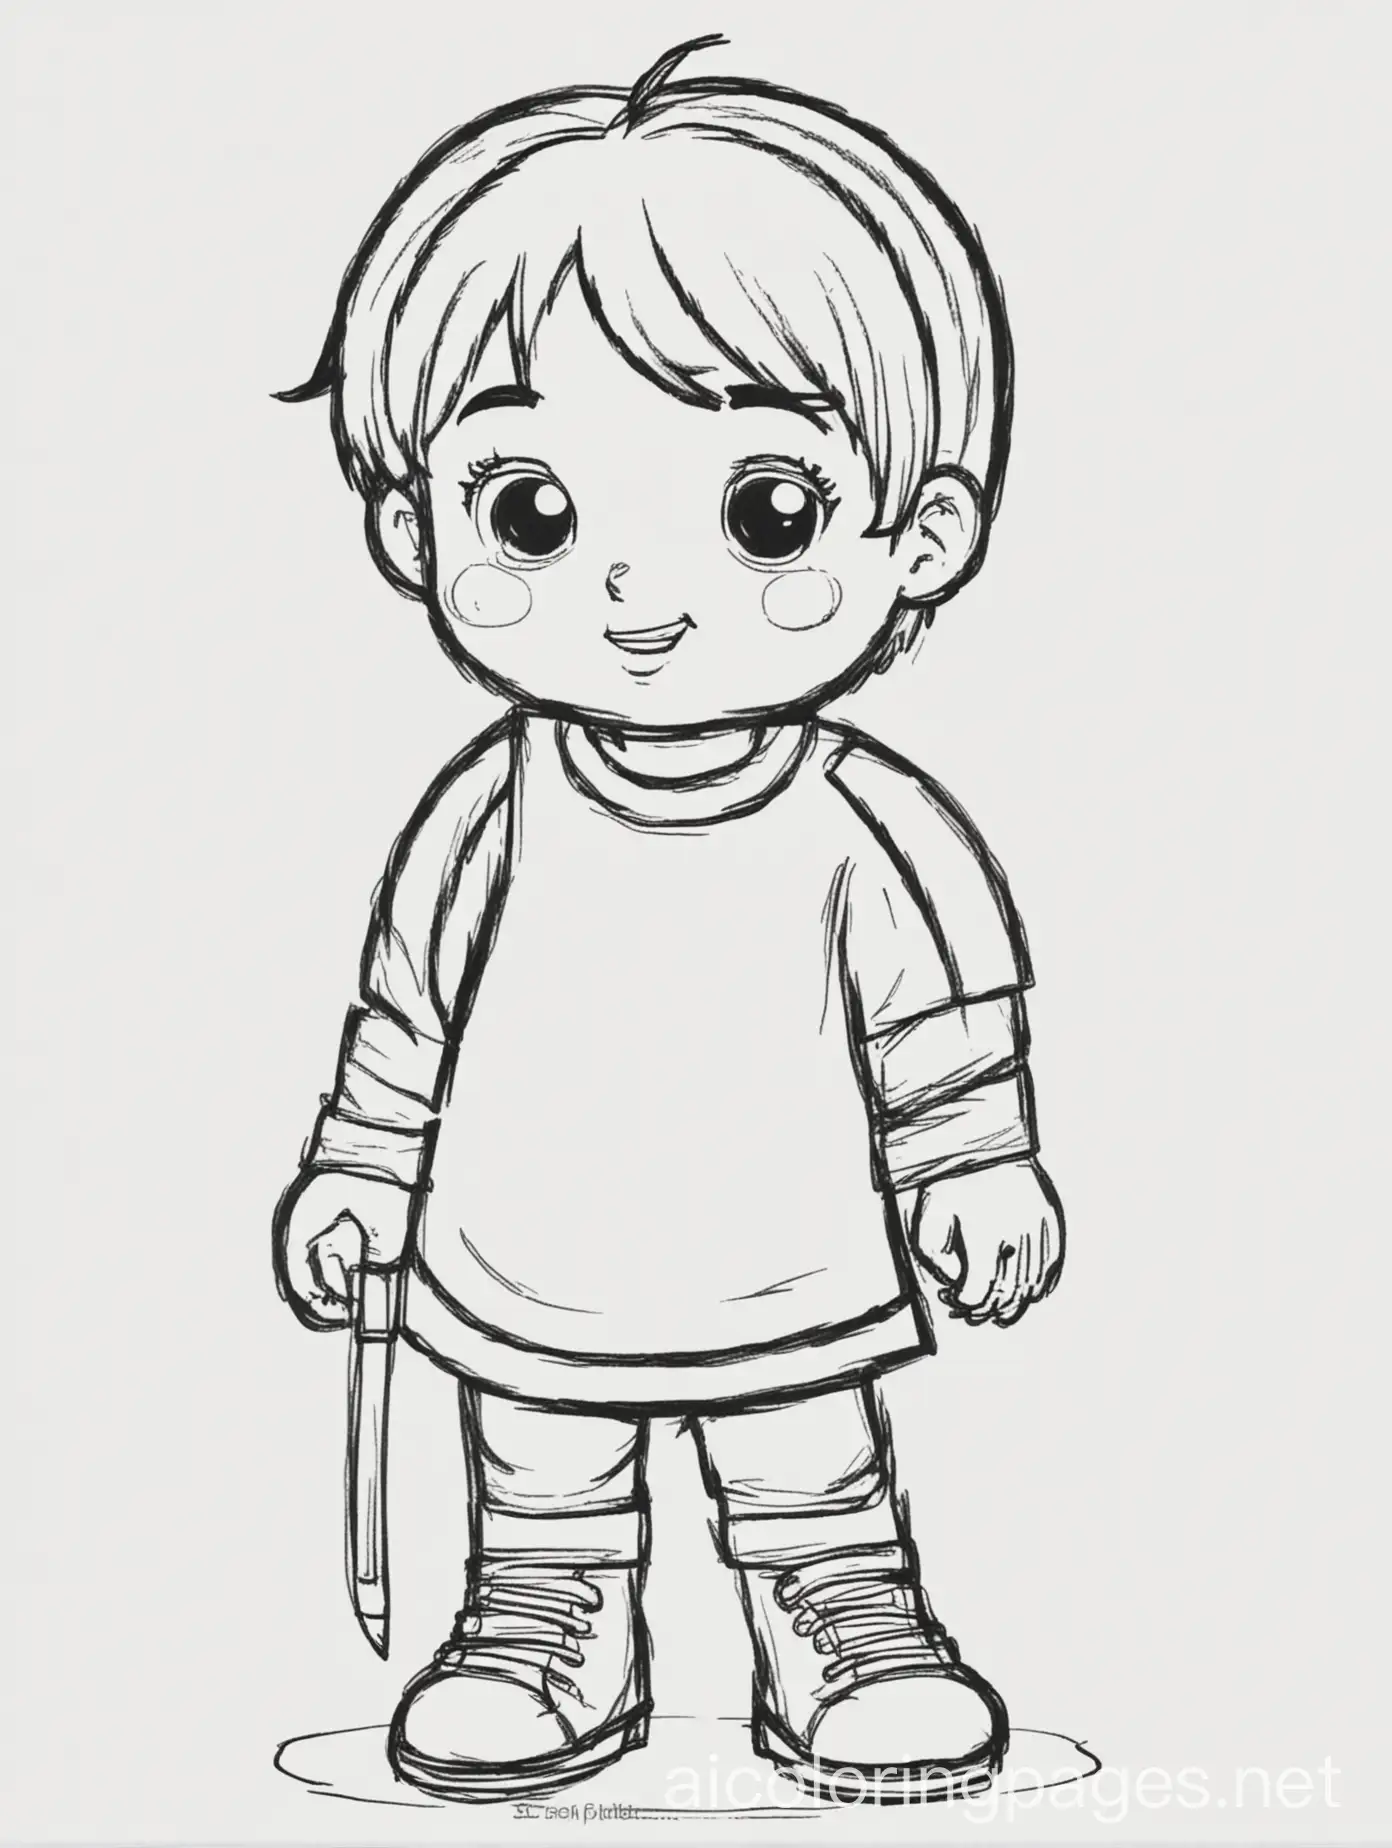 player, Coloring Page, black and white, line art, white background, Simplicity, Ample White Space. The background of the coloring page is plain white to make it easy for young children to color within the lines. The outlines of all the subjects are easy to distinguish, making it simple for kids to color without too much difficulty